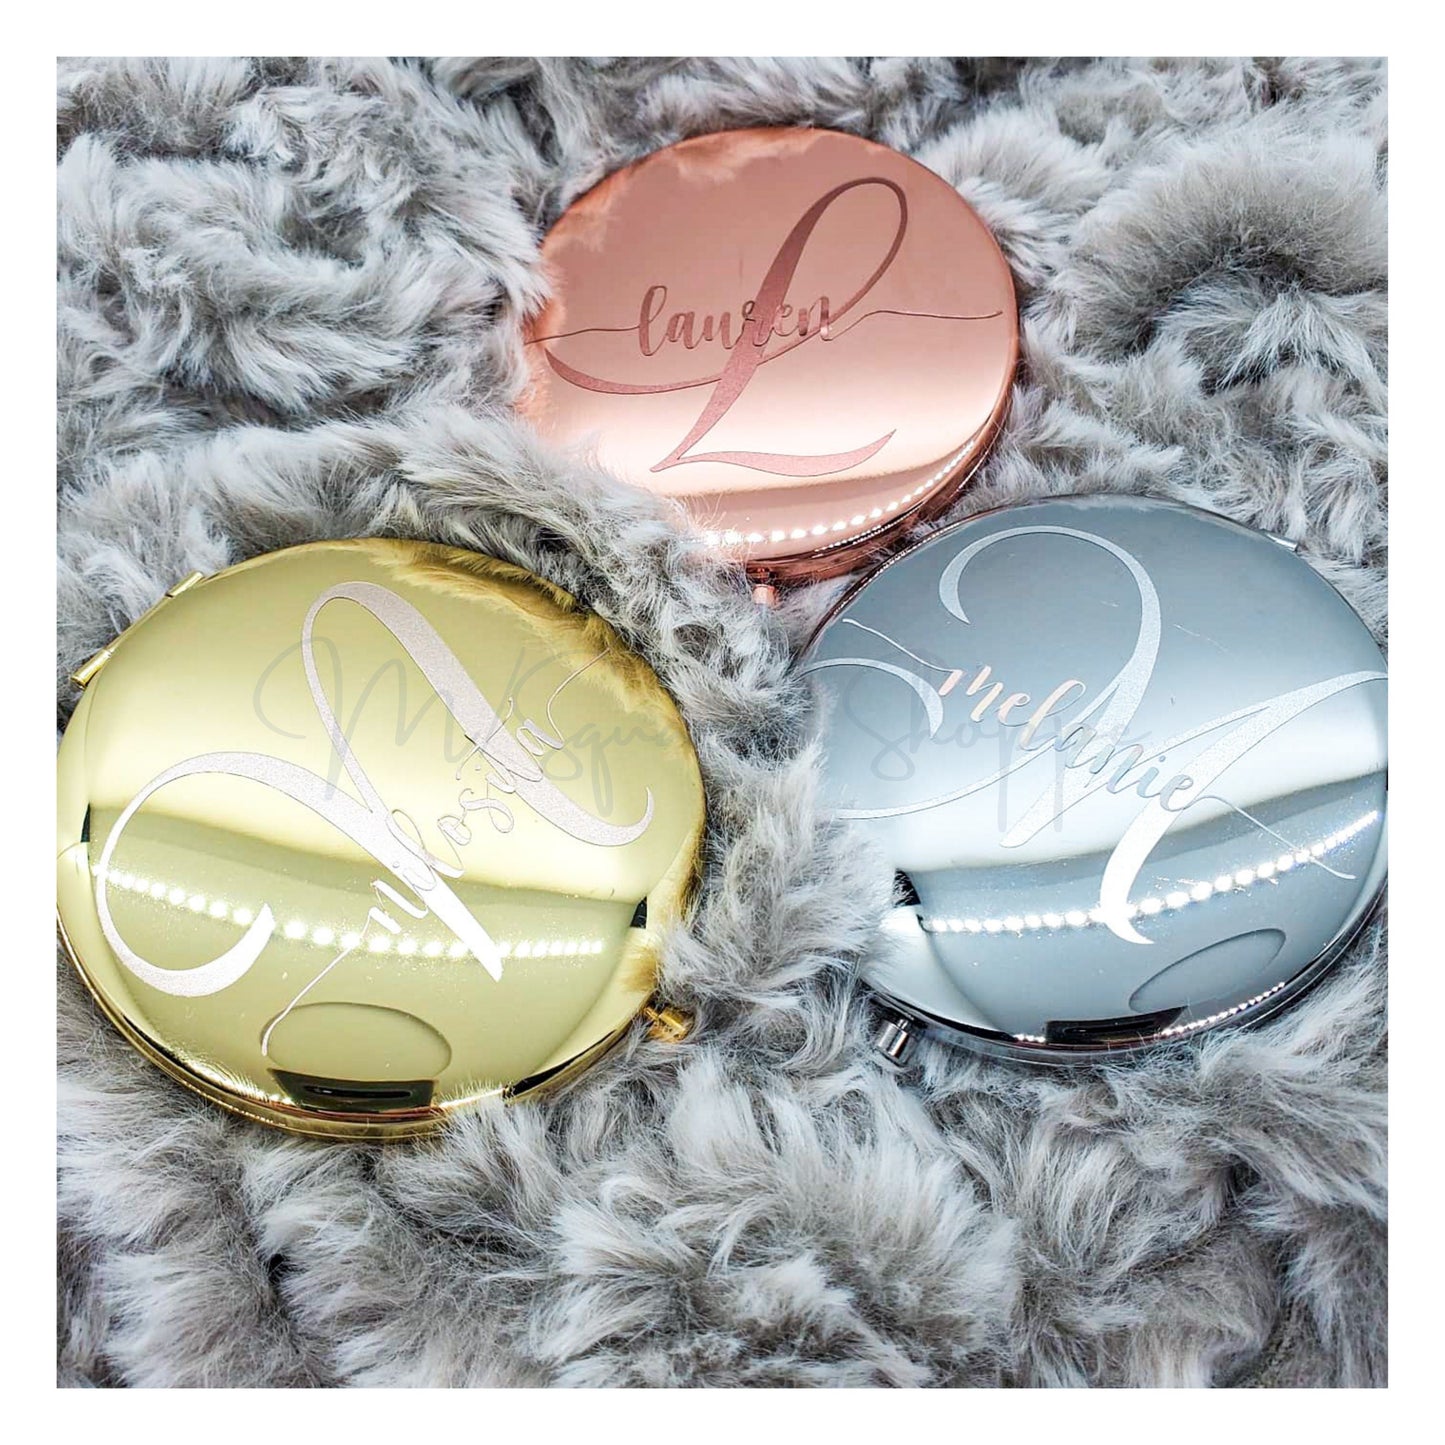 COMPACT MIRROR, vintage, personalized, bridesmaid gifts, pocket mirror, gifts for women, gift under 20